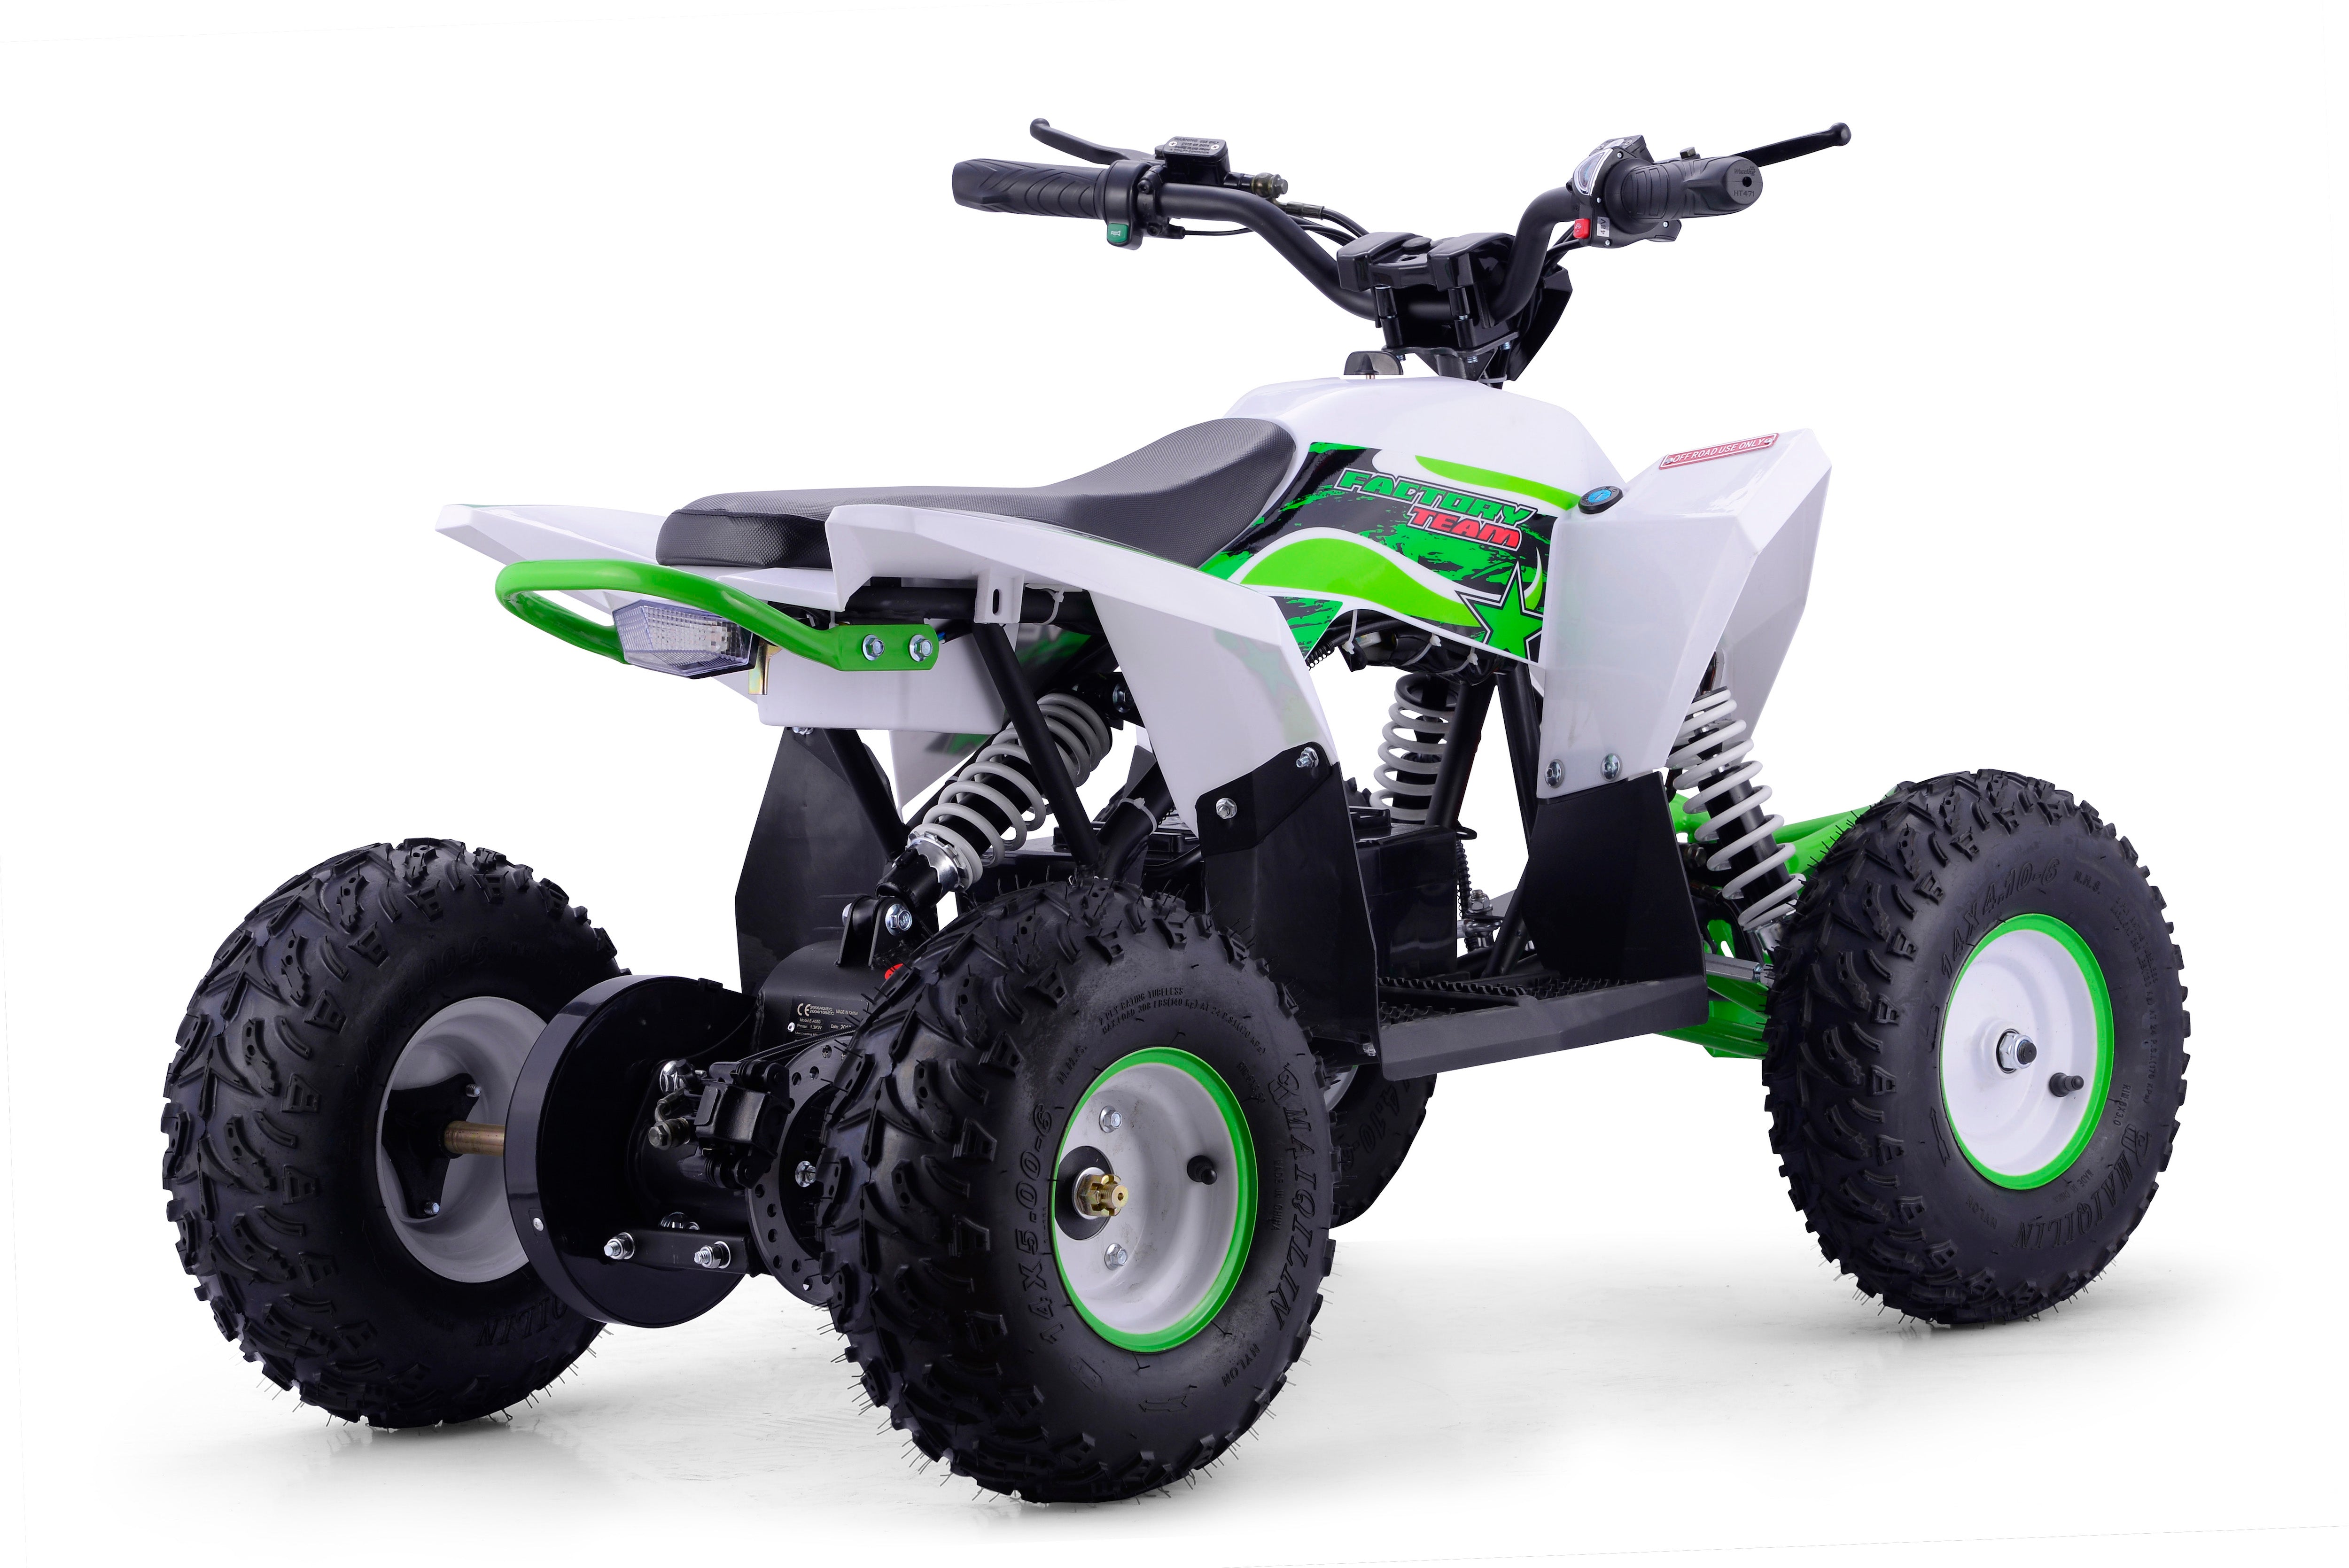 The Most Impressive Elements of Affordable ATVs